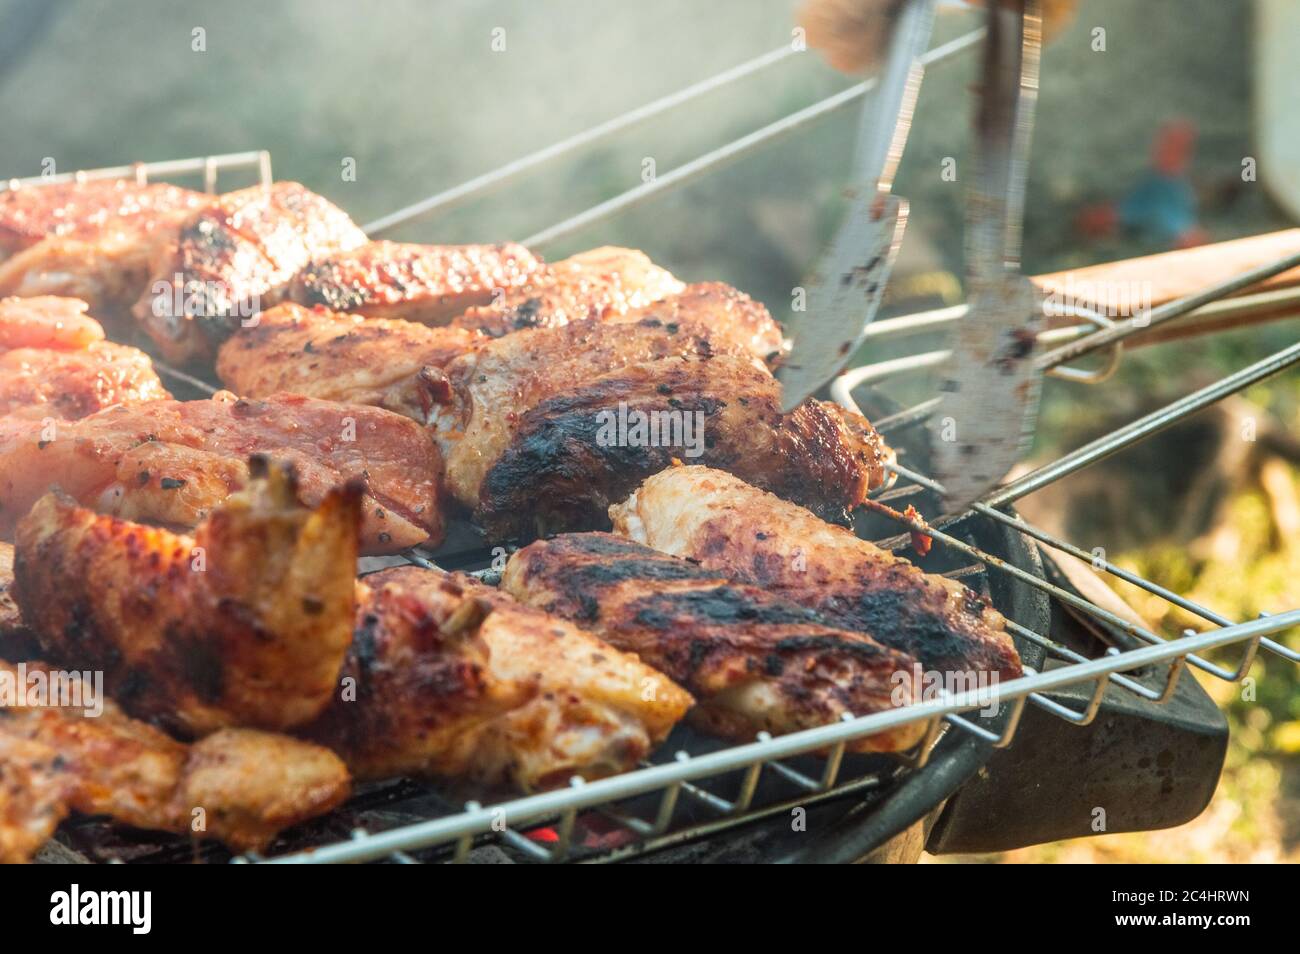 Flipping a barbecued chicken meat with tongs on a charcoal barbeque grill. Tasty snack party. Stock Photo